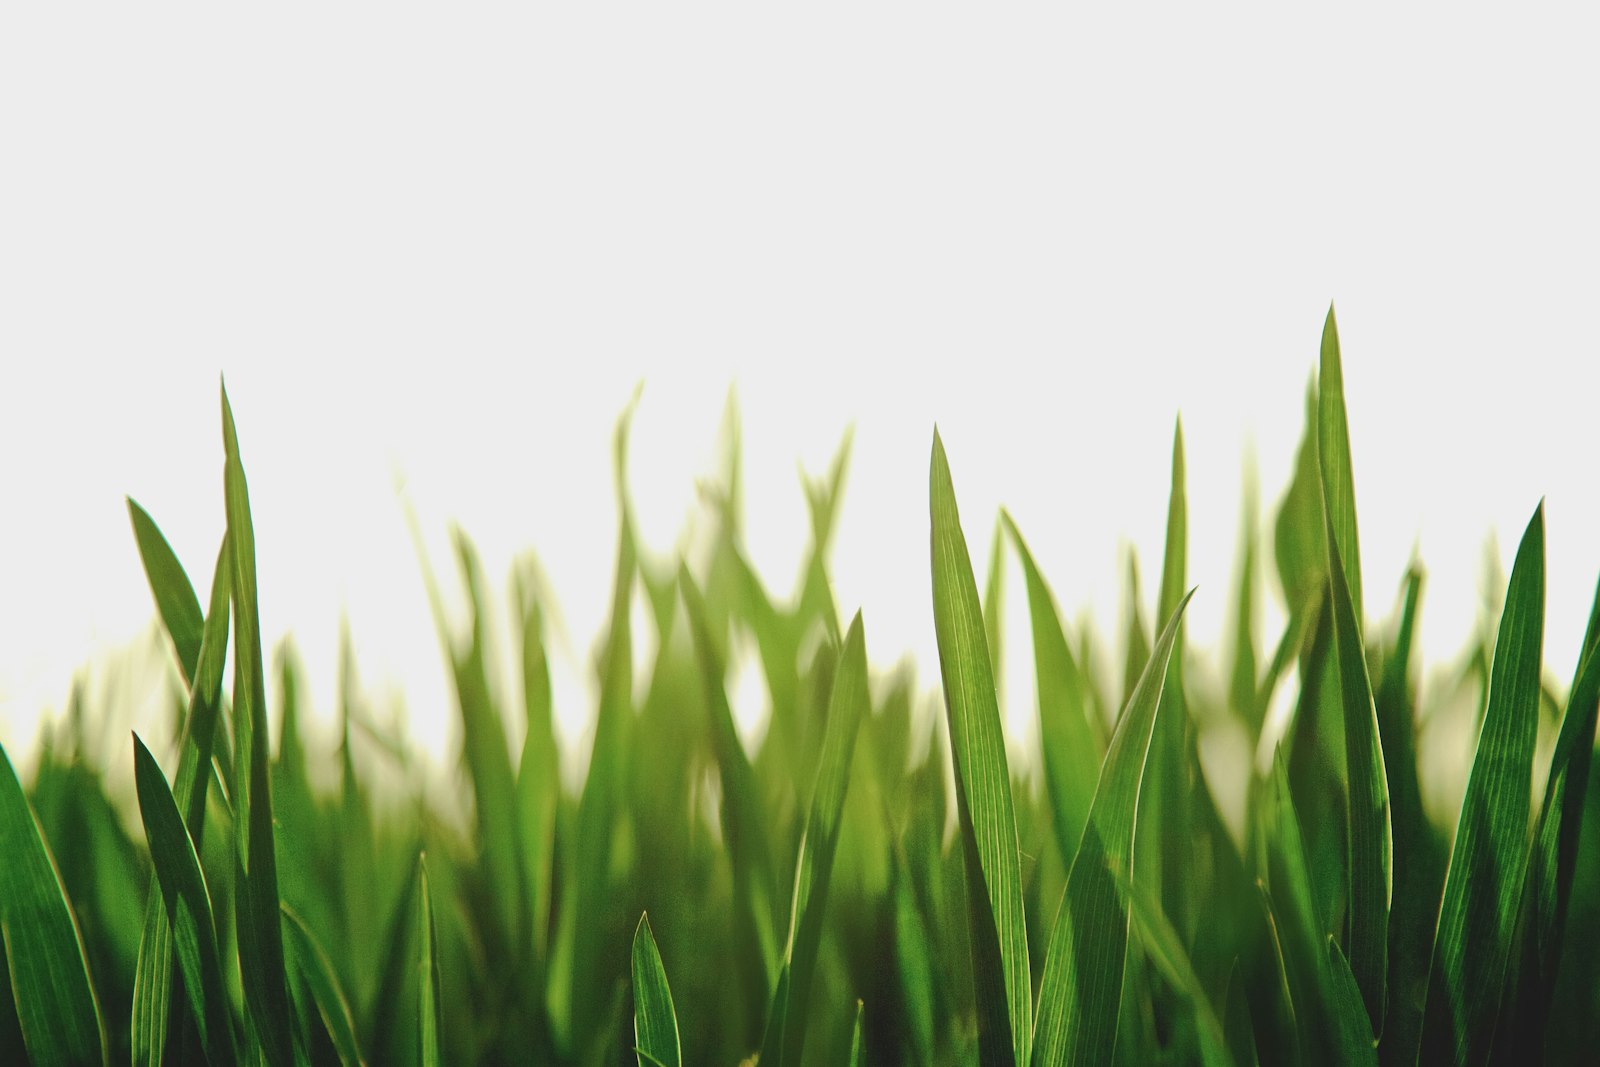 Lush and Vibrant: Power Up Your Zoysia Grass with Our Fertilizer Recommendations